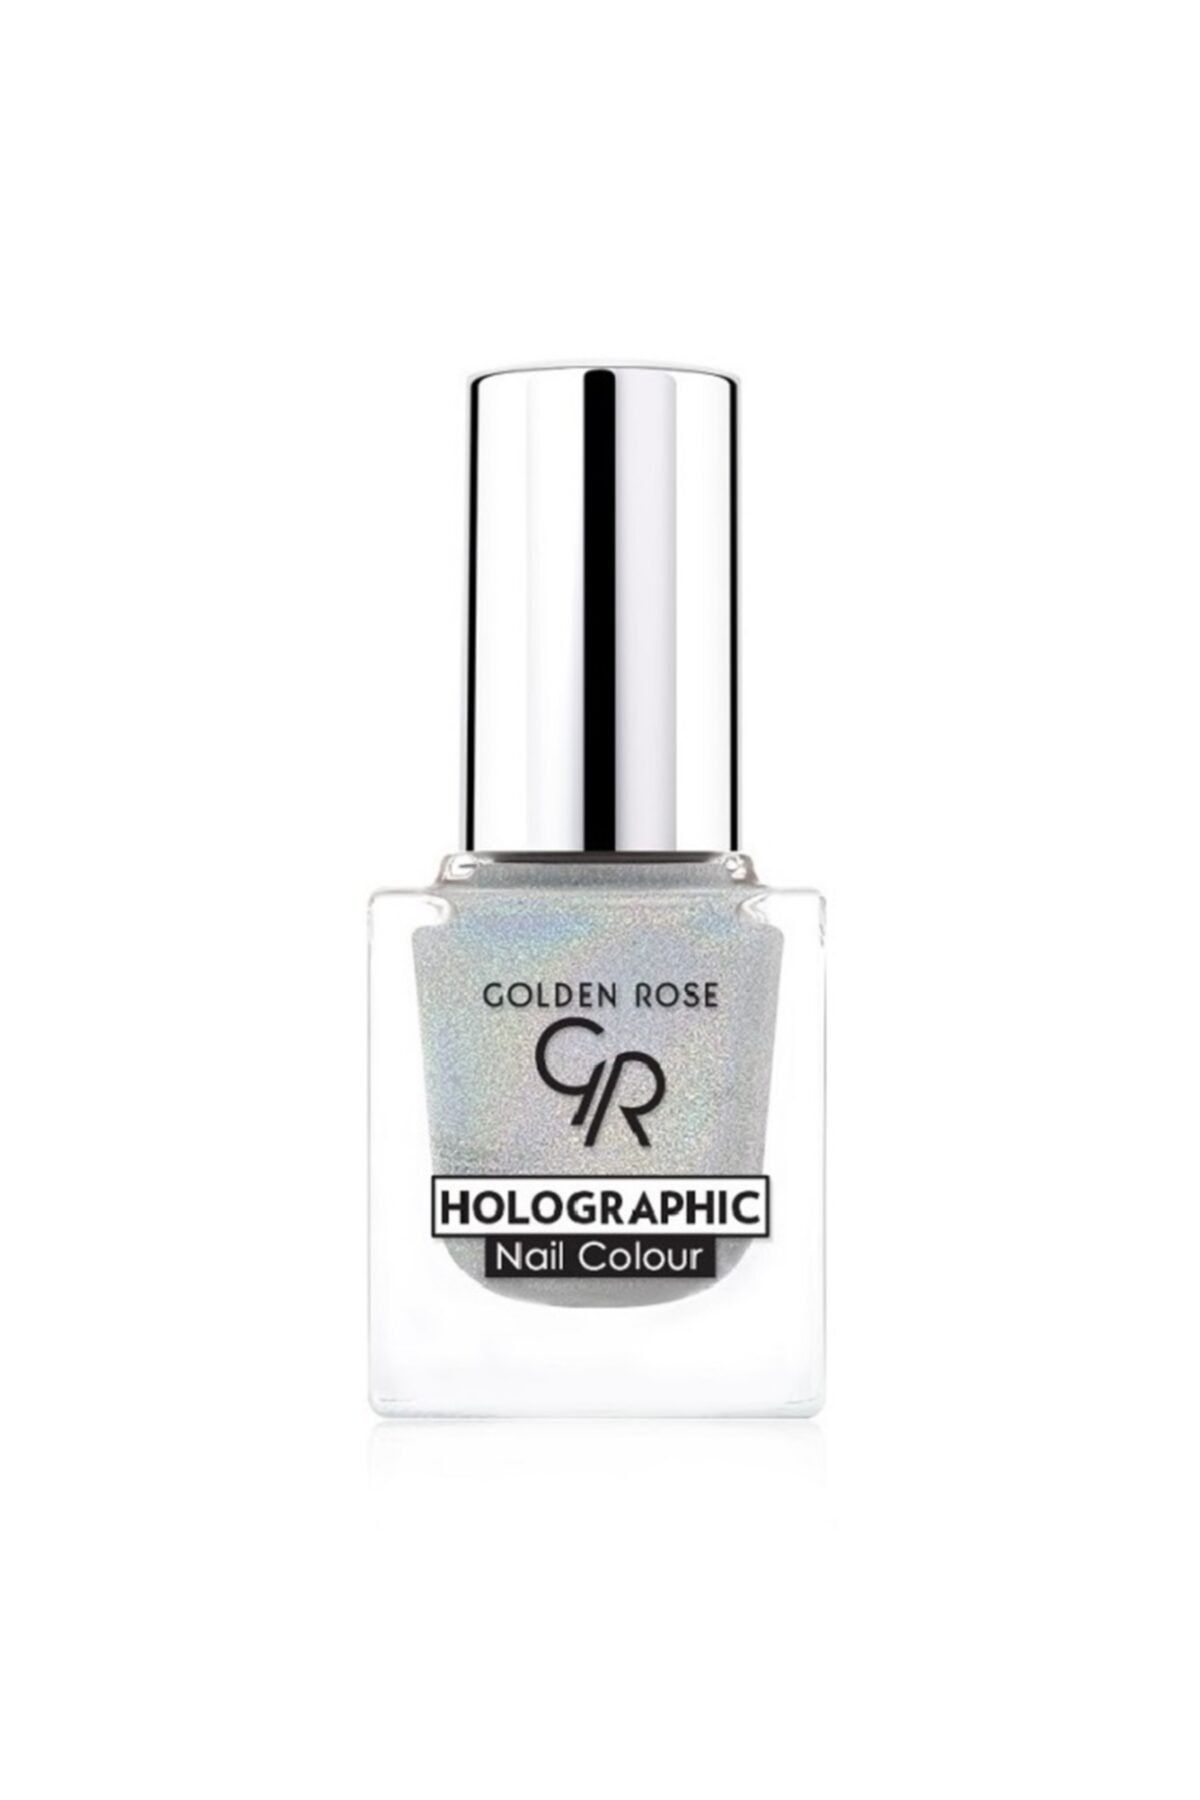 Golden Rose Oje - Holographic Nail Colour No: 01 8691190764012